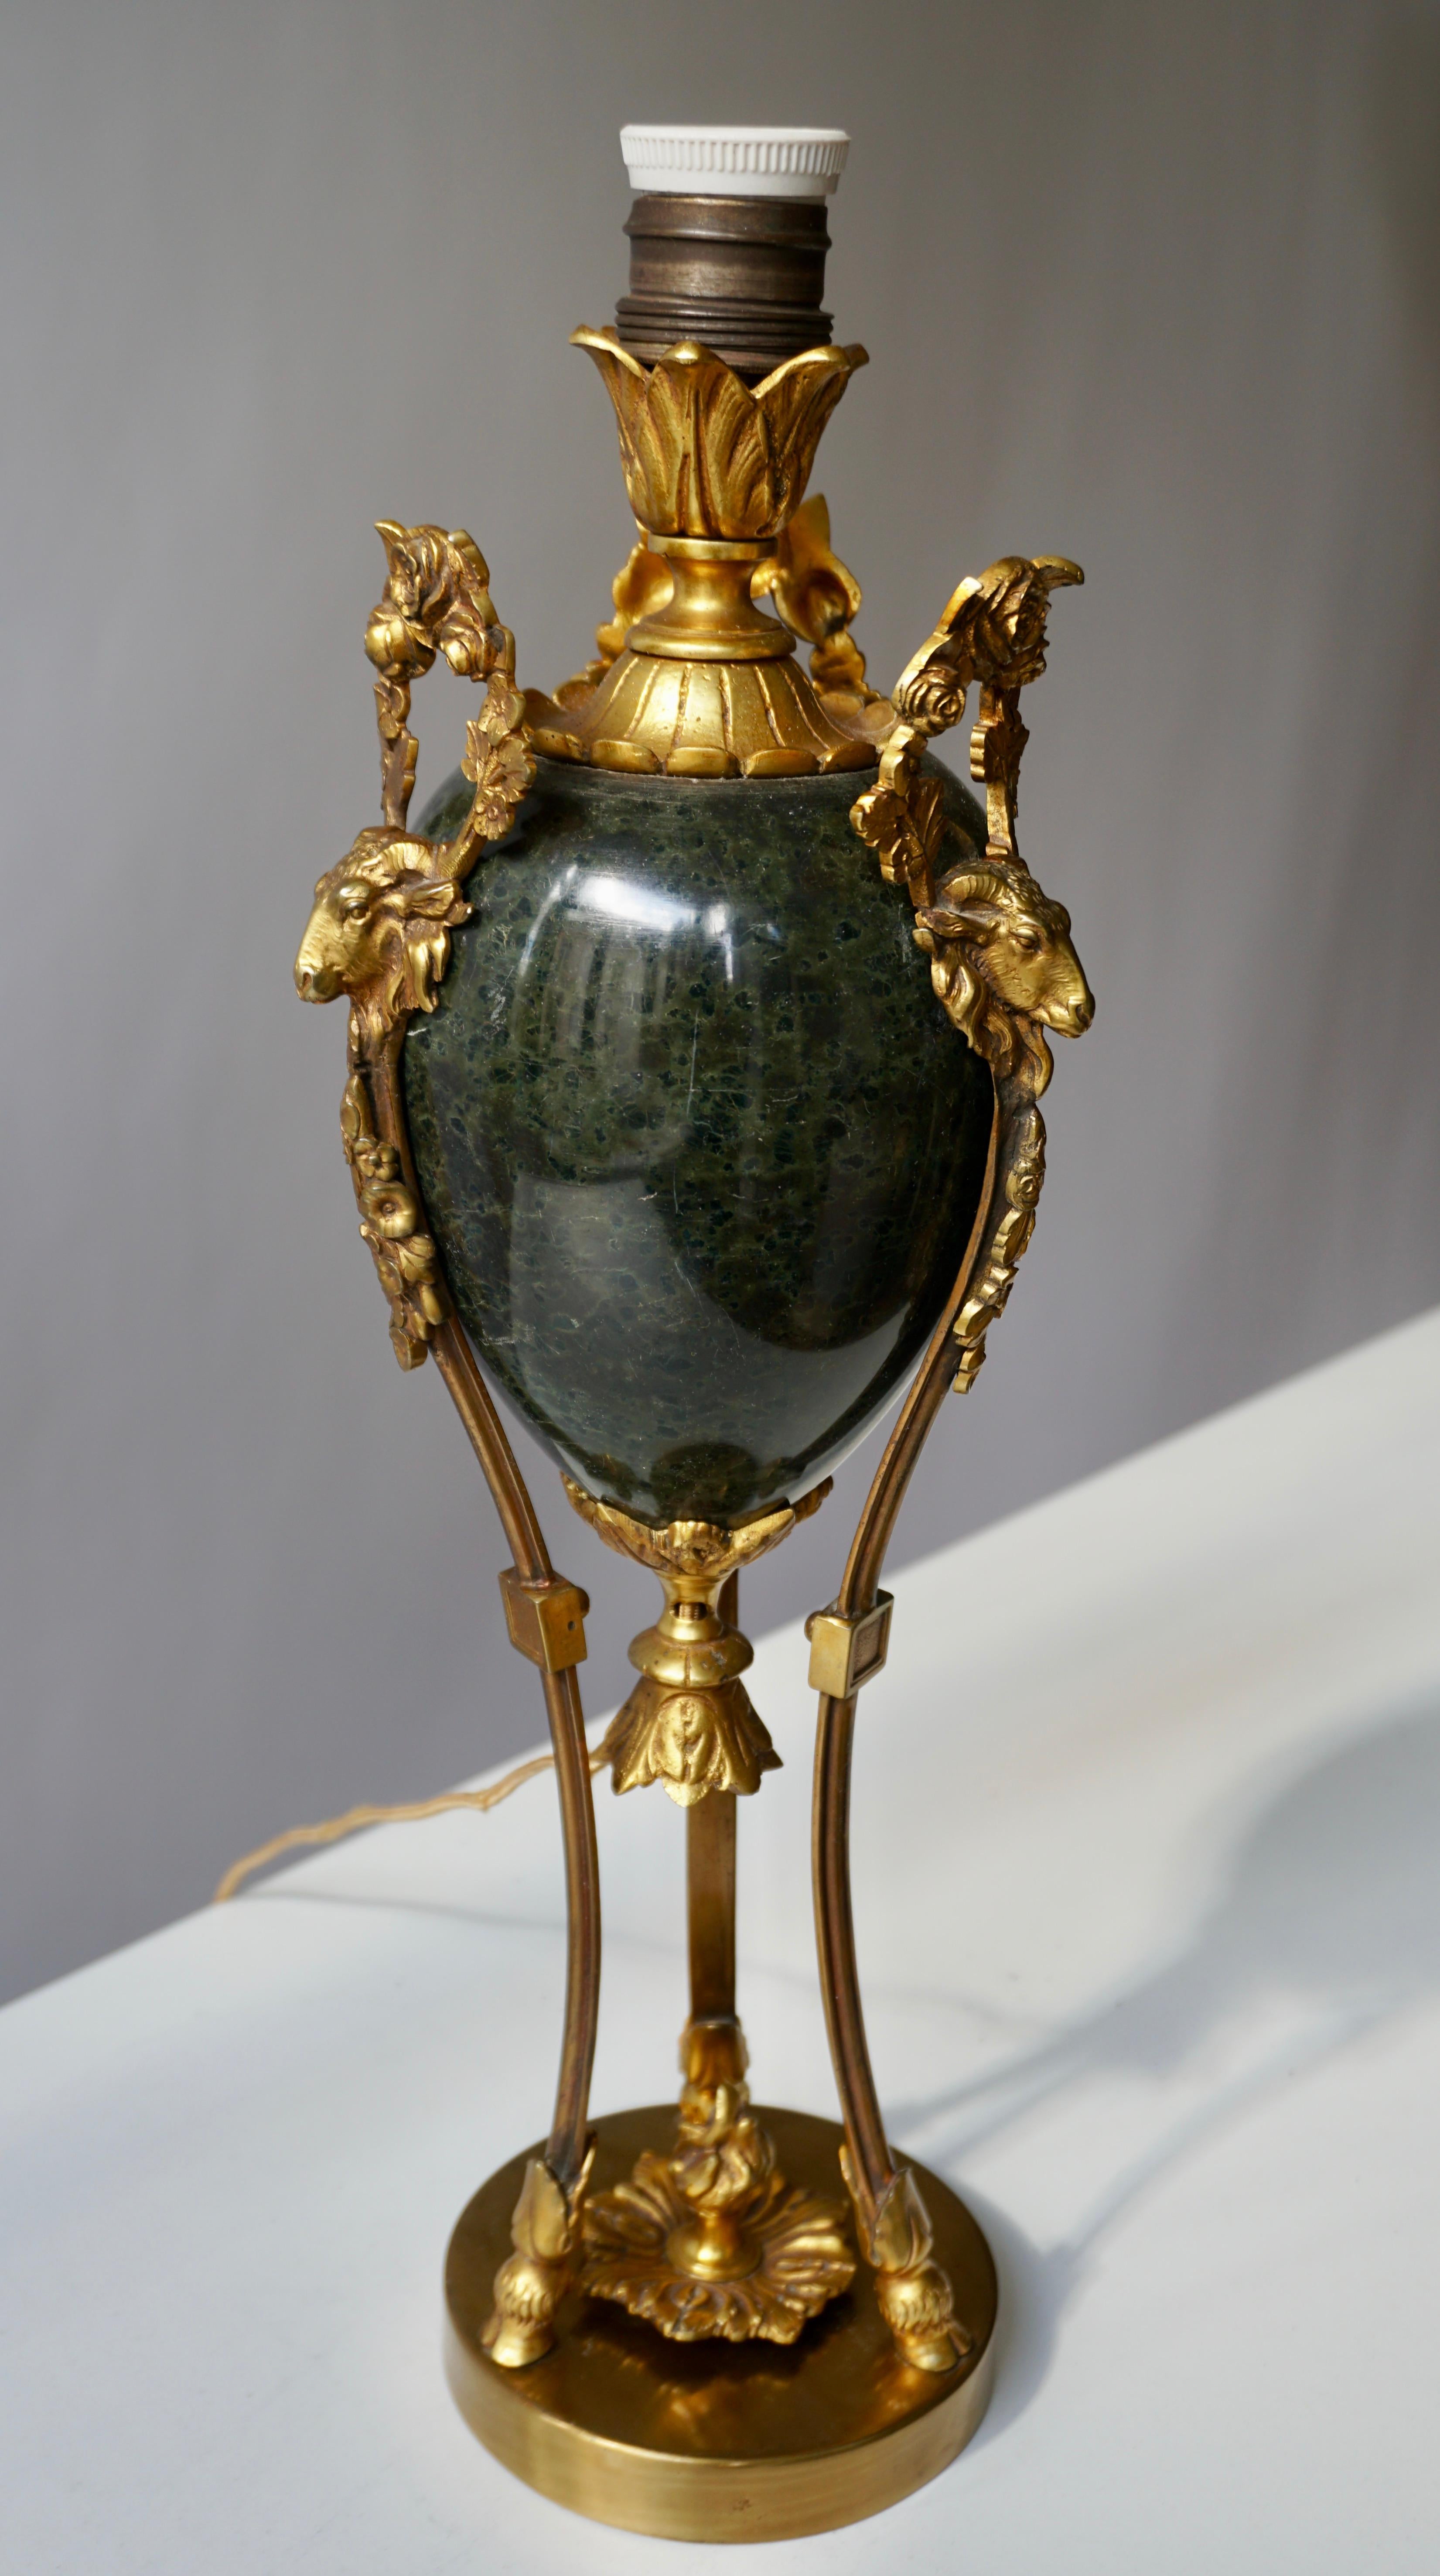 This very fine and heavy black and green marble urn, adorned with bronze rams heads and bronze ormolu, has been crafted into an elegant table lamp. 
Measures: Height 46 cm.
Diameter 14 cm.
Weight 3 kg.